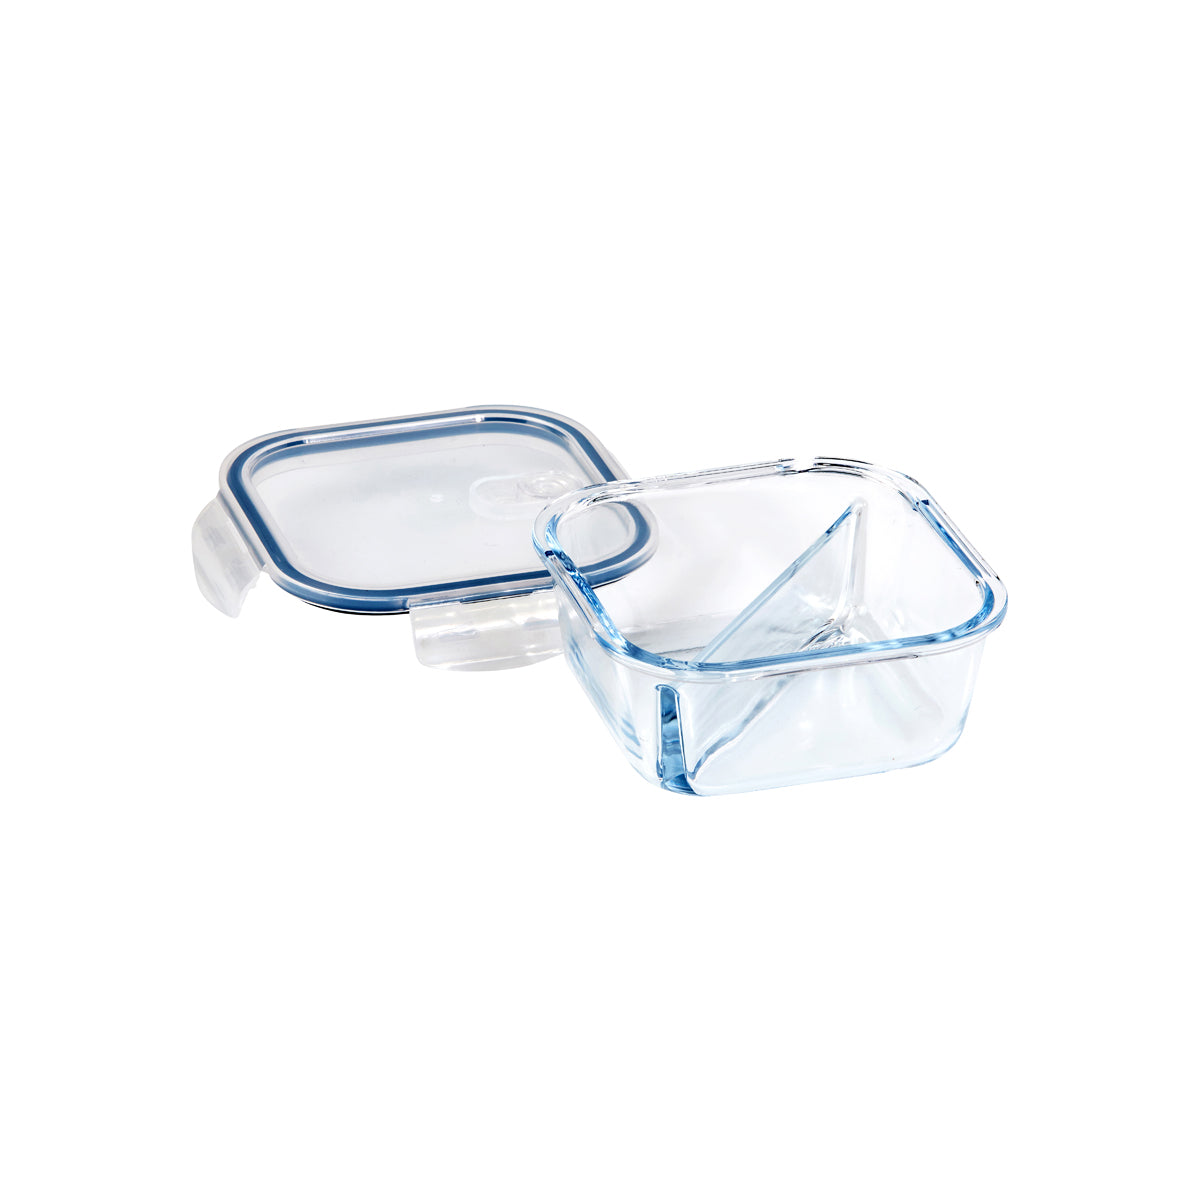 ETR48141 Eterna Glass Containers 2 Divider Square 780ml Tomkin Australia Hospitality Supplies